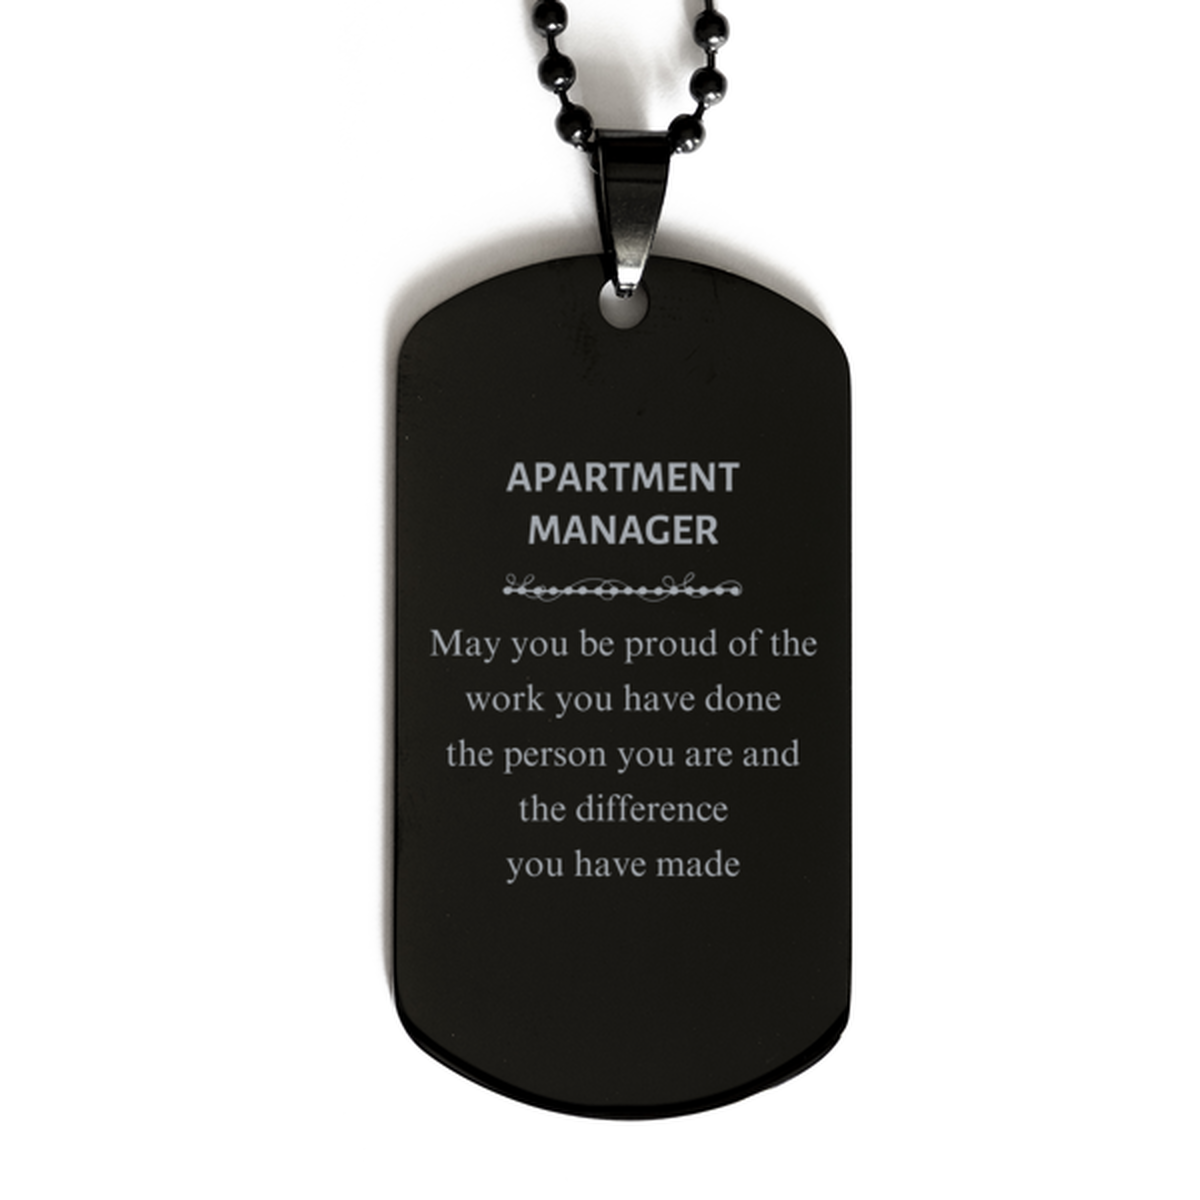 Apartment Manager May you be proud of the work you have done, Retirement Apartment Manager Black Dog Tag for Colleague Appreciation Gifts Amazing for Apartment Manager